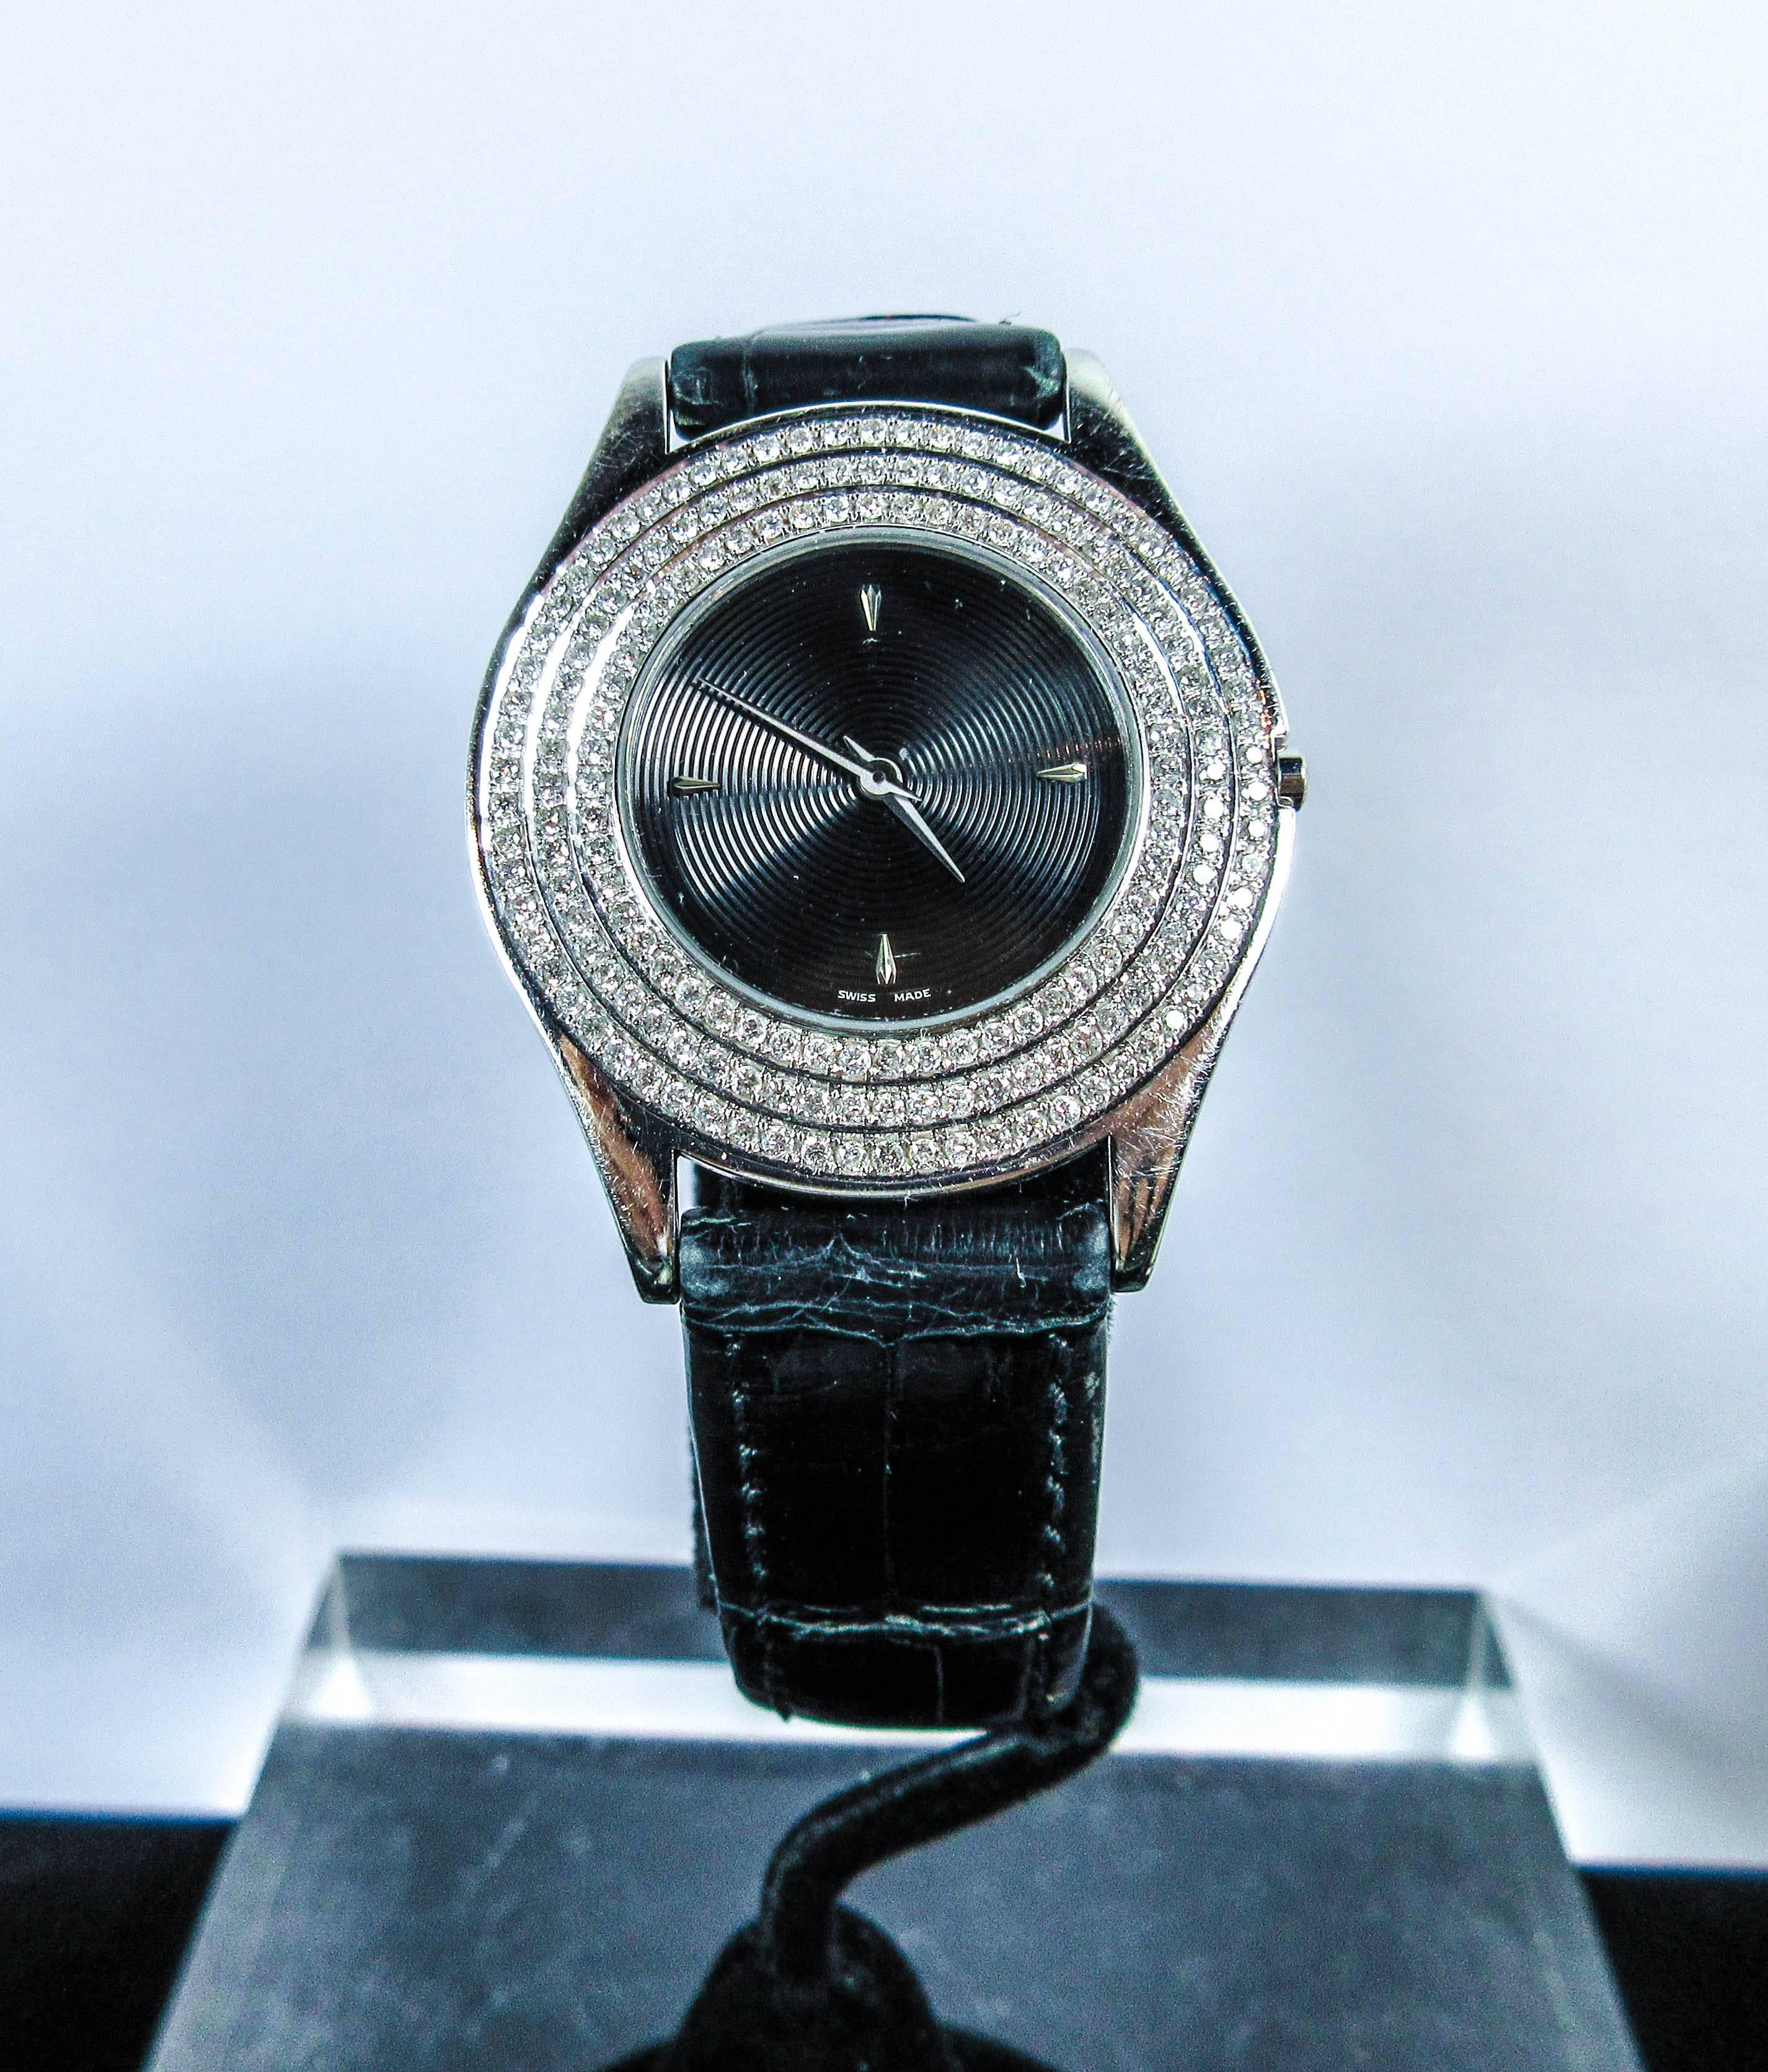 This Maubossin watch is composed of a black alligator band and diamond pave face. In excellent pre-owned condition.

Please feel free to ask any questions you may have, we are happy to assist. 

Size: 
Band
Length: 6.25"-7.25"

Face
Width: